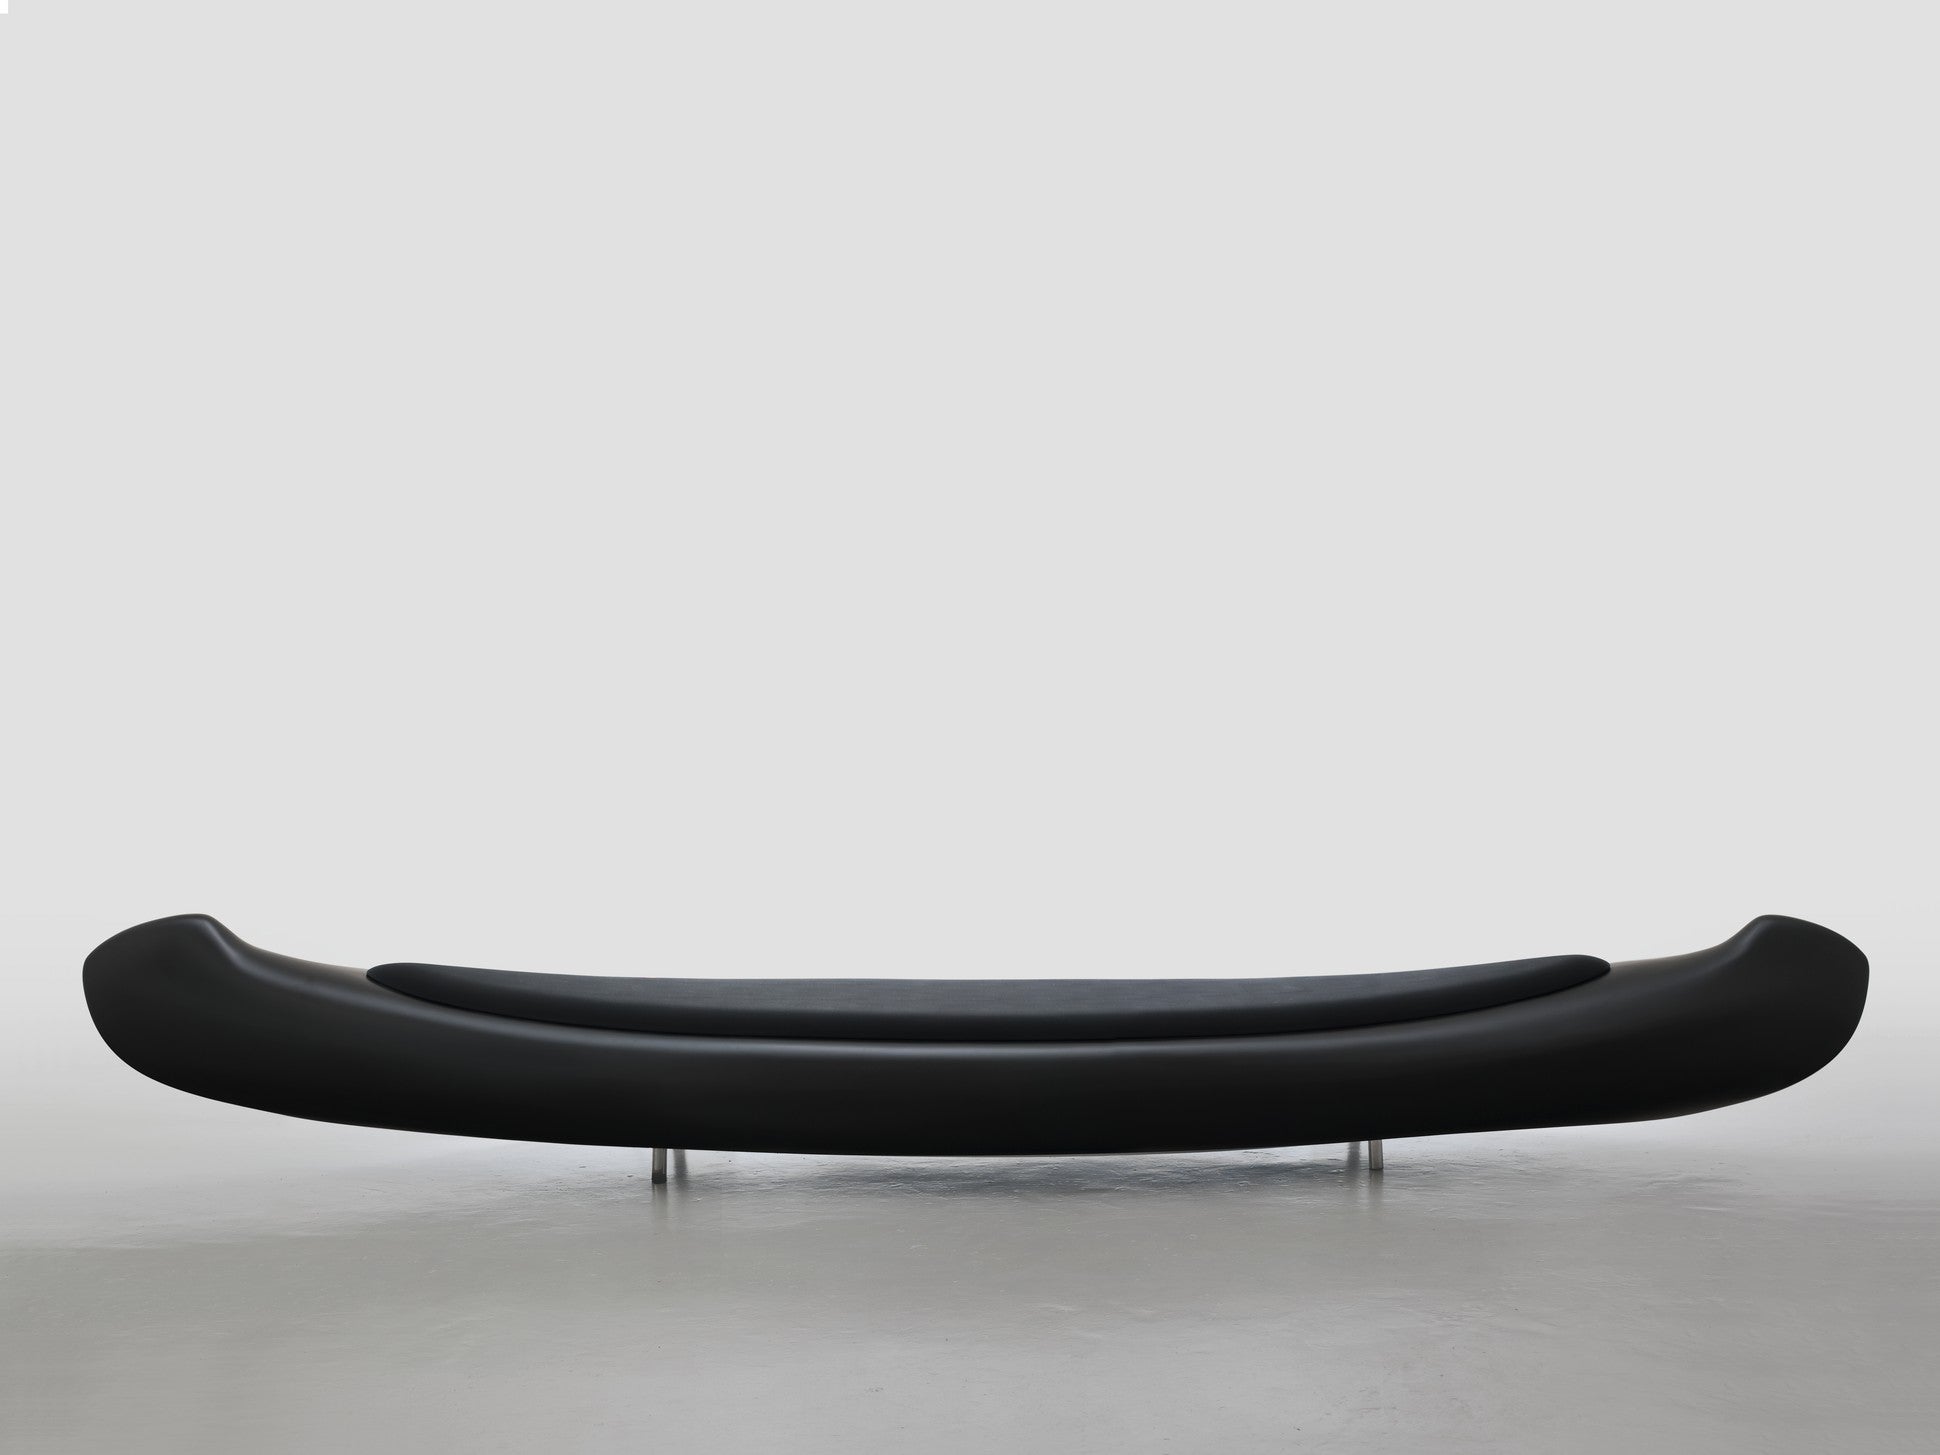 Trip bench by Imperfettolab
Dimensions: 490 x 85 x H 71 cm
Materials: Fibreglass, steel, fabric.
Other colors and sizes available.

Imperfetto Lab
Who we are ? We are a family.
Verter Turroni, Emanuela Ravelli and our children Elia,